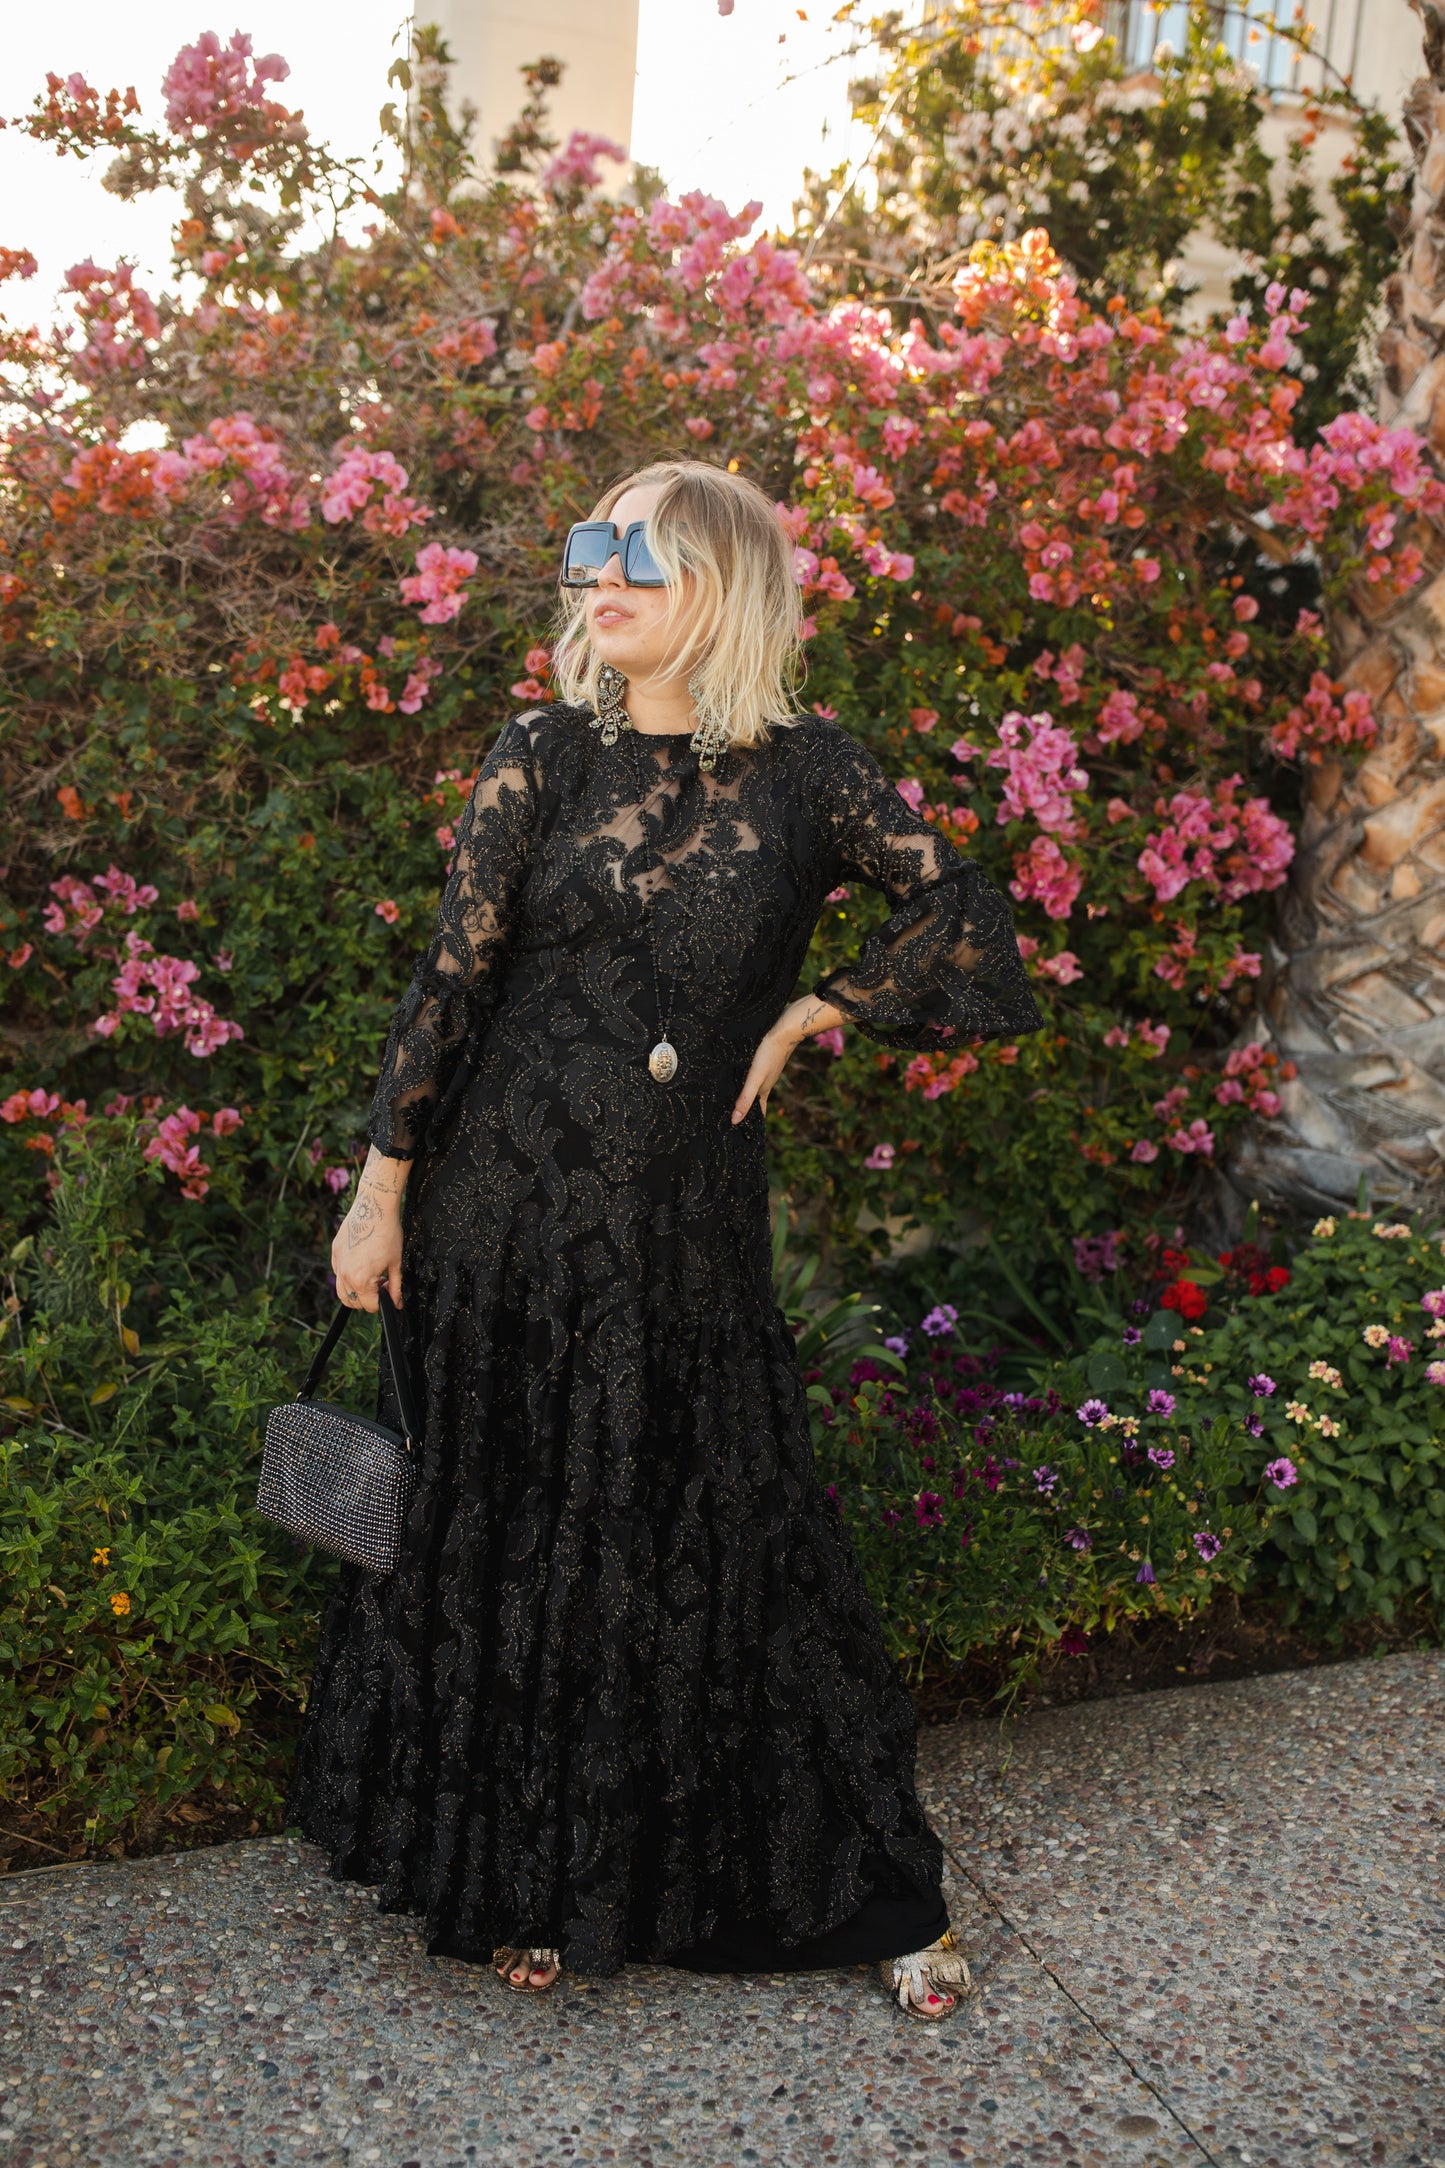 jennafer grace petite mystic lace ruffle dress 3 tiered skirt semi-sheer black lace gold metallic thread shimmery goth evening gown gothic boho bohemian hippie romantic whimsical handmade in california usa